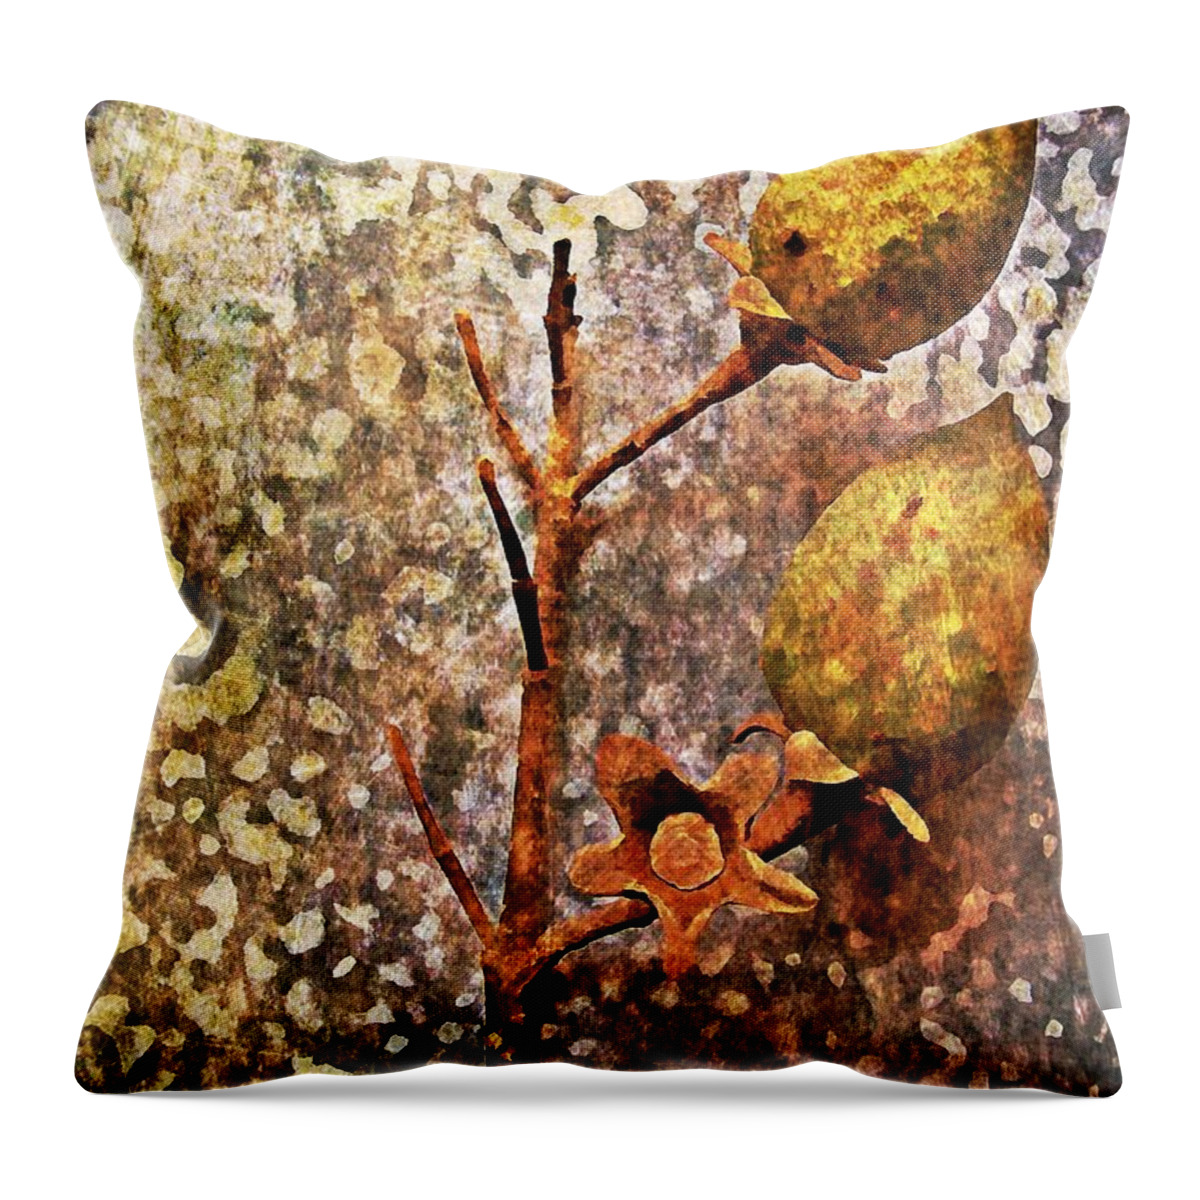 Nature Throw Pillow featuring the digital art Nature Abstract 21 by Maria Huntley